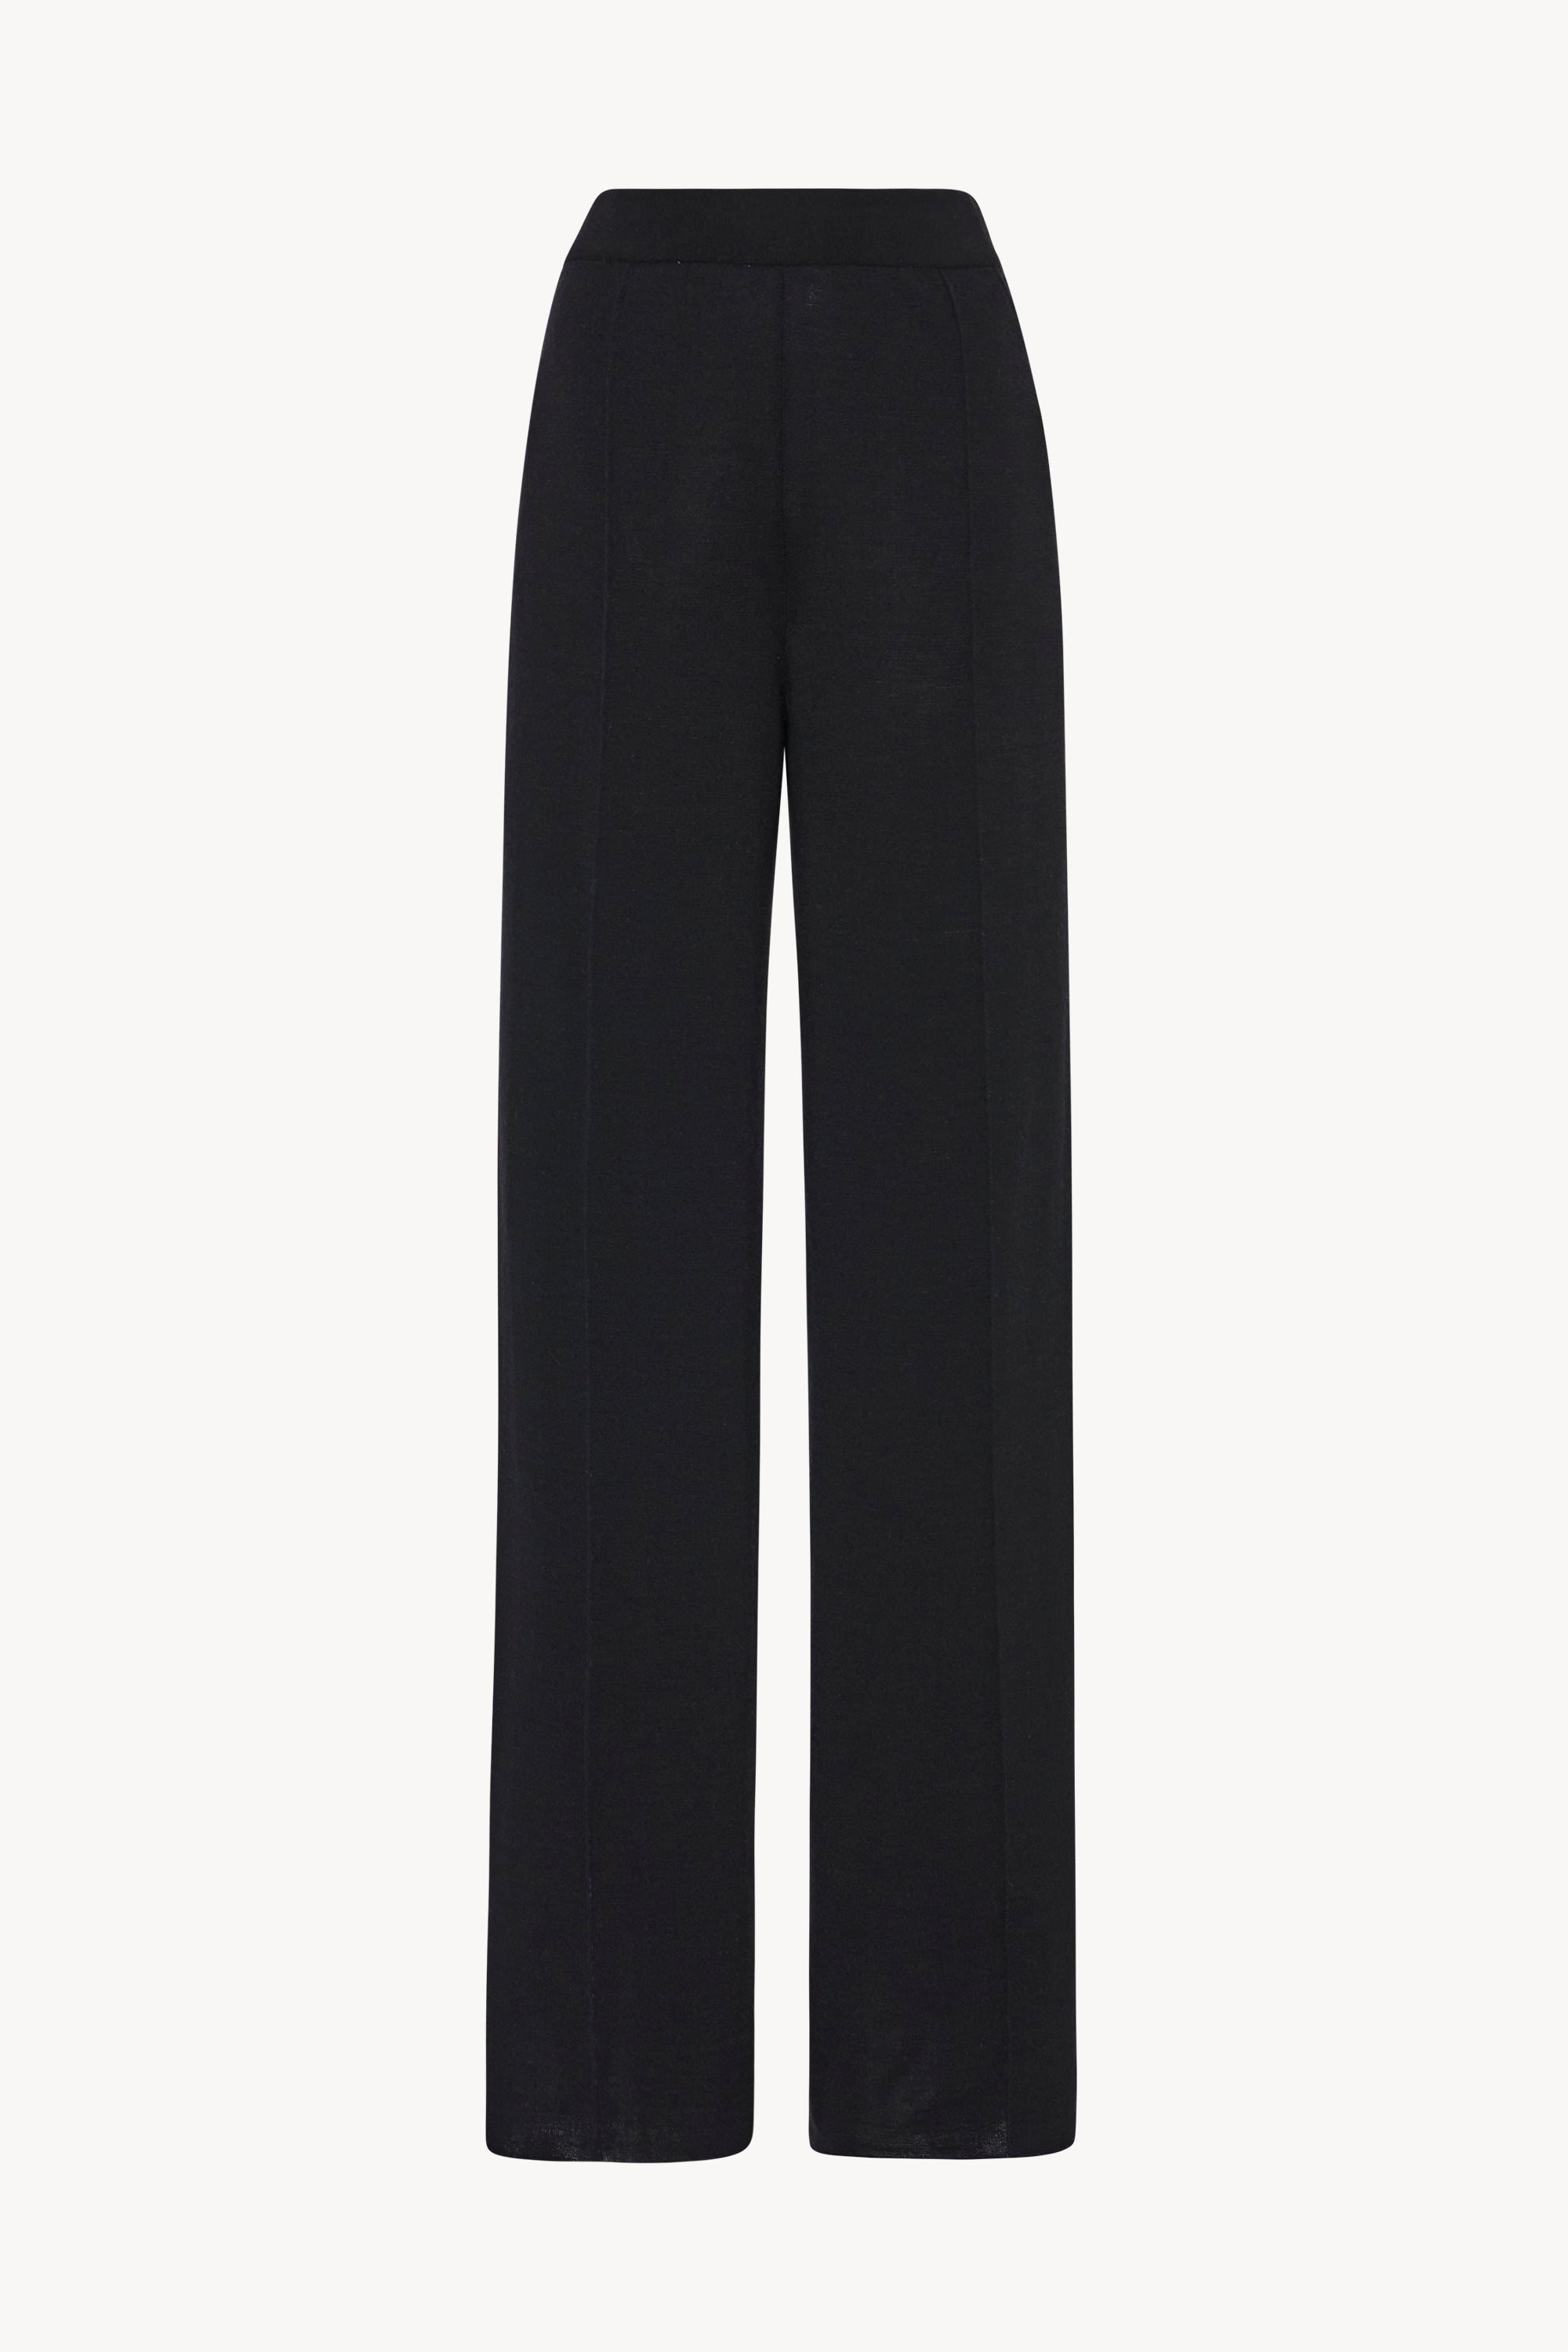 Egle Pant in Wool, Silk and Cashmere - 1